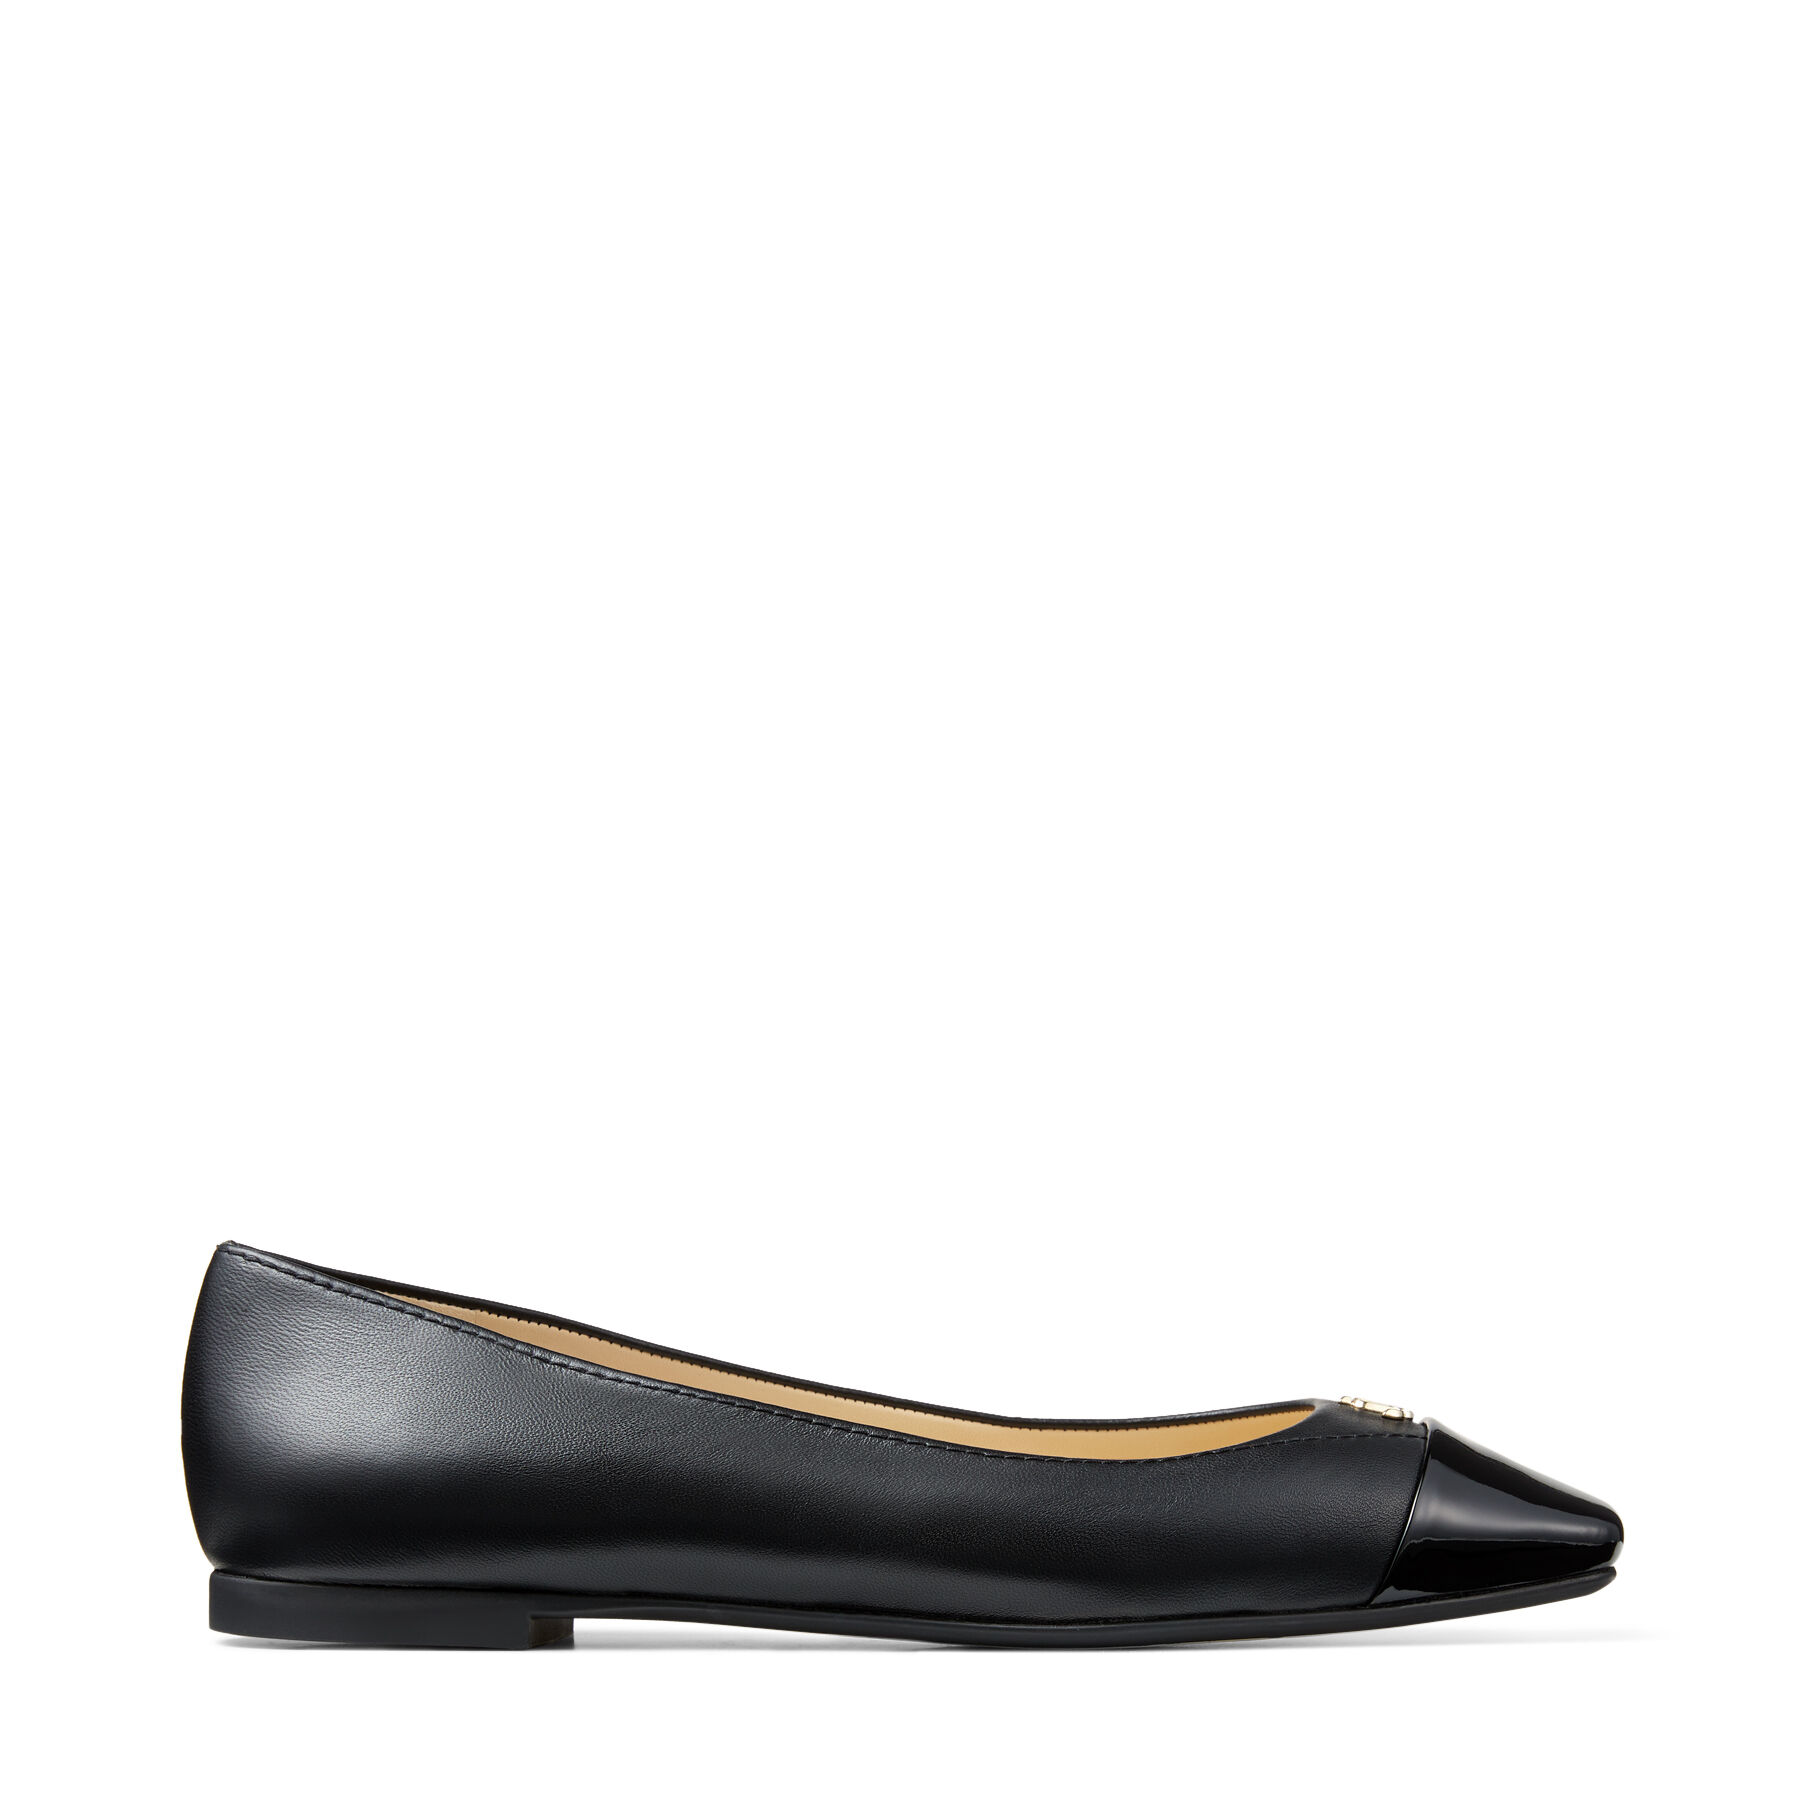 Black Nappa and Patent Leather Square-Toe Flats with JC Emblem | GISELA